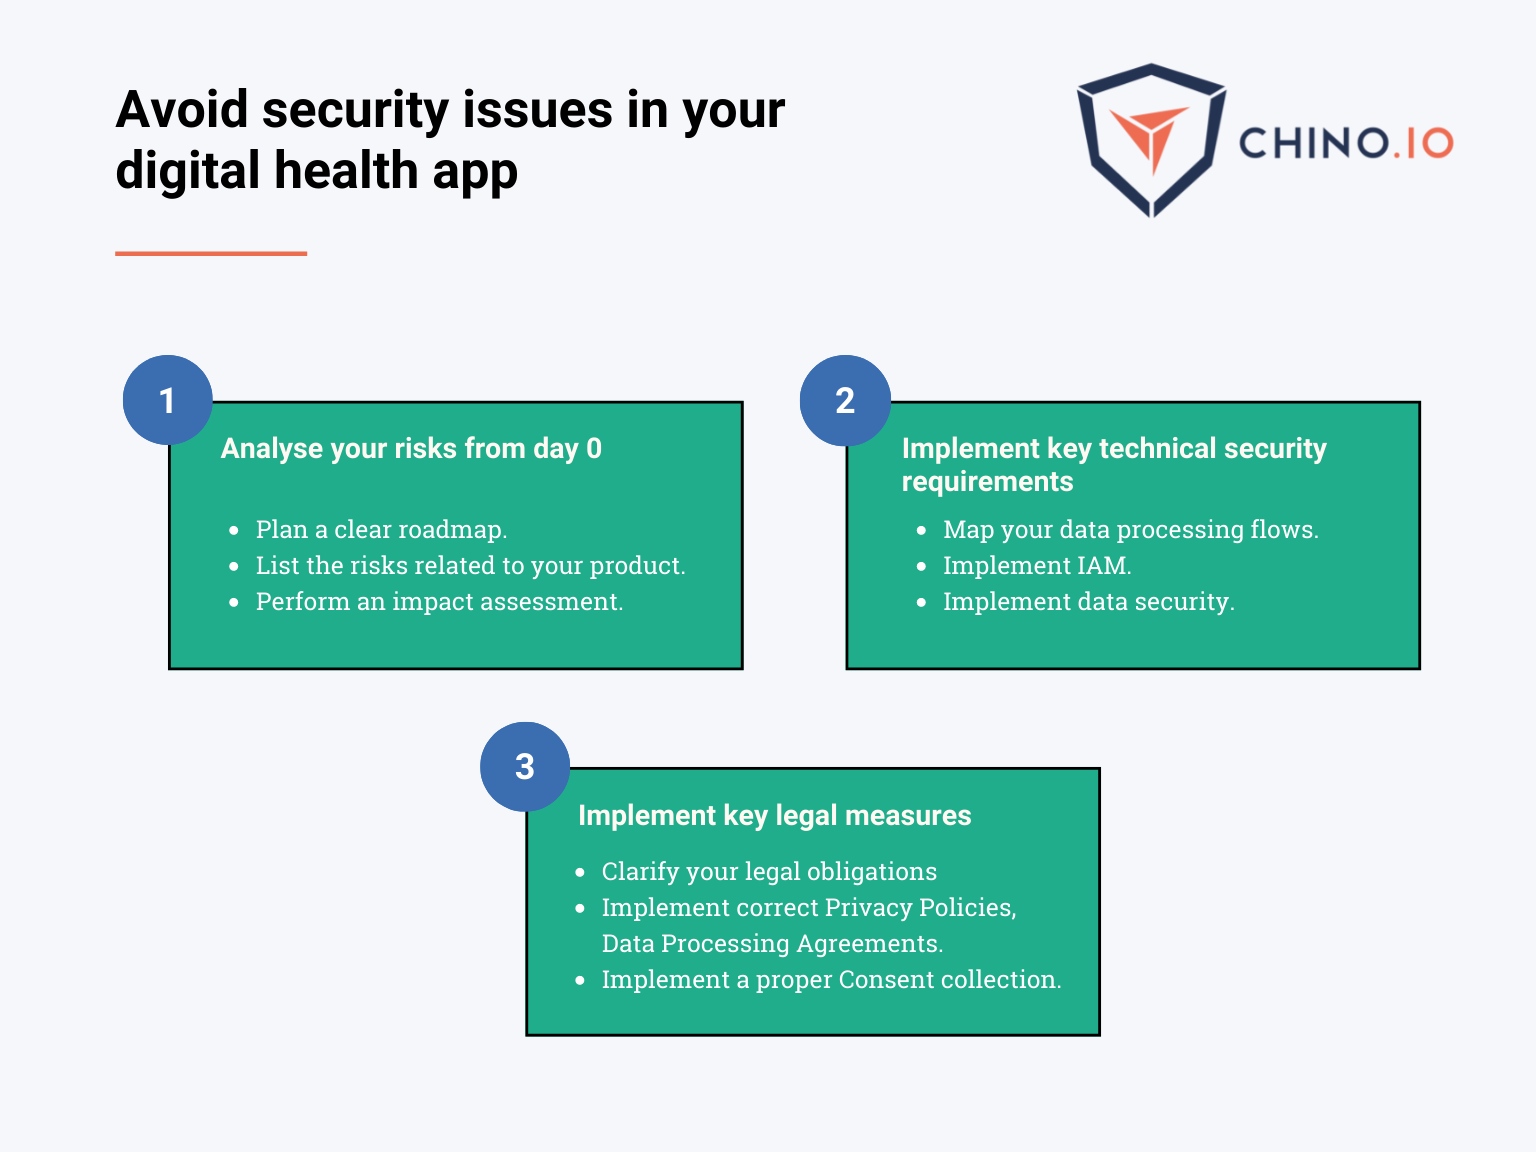 Scheme with green boxes showing the main point on avoid security issues in digital health apps 